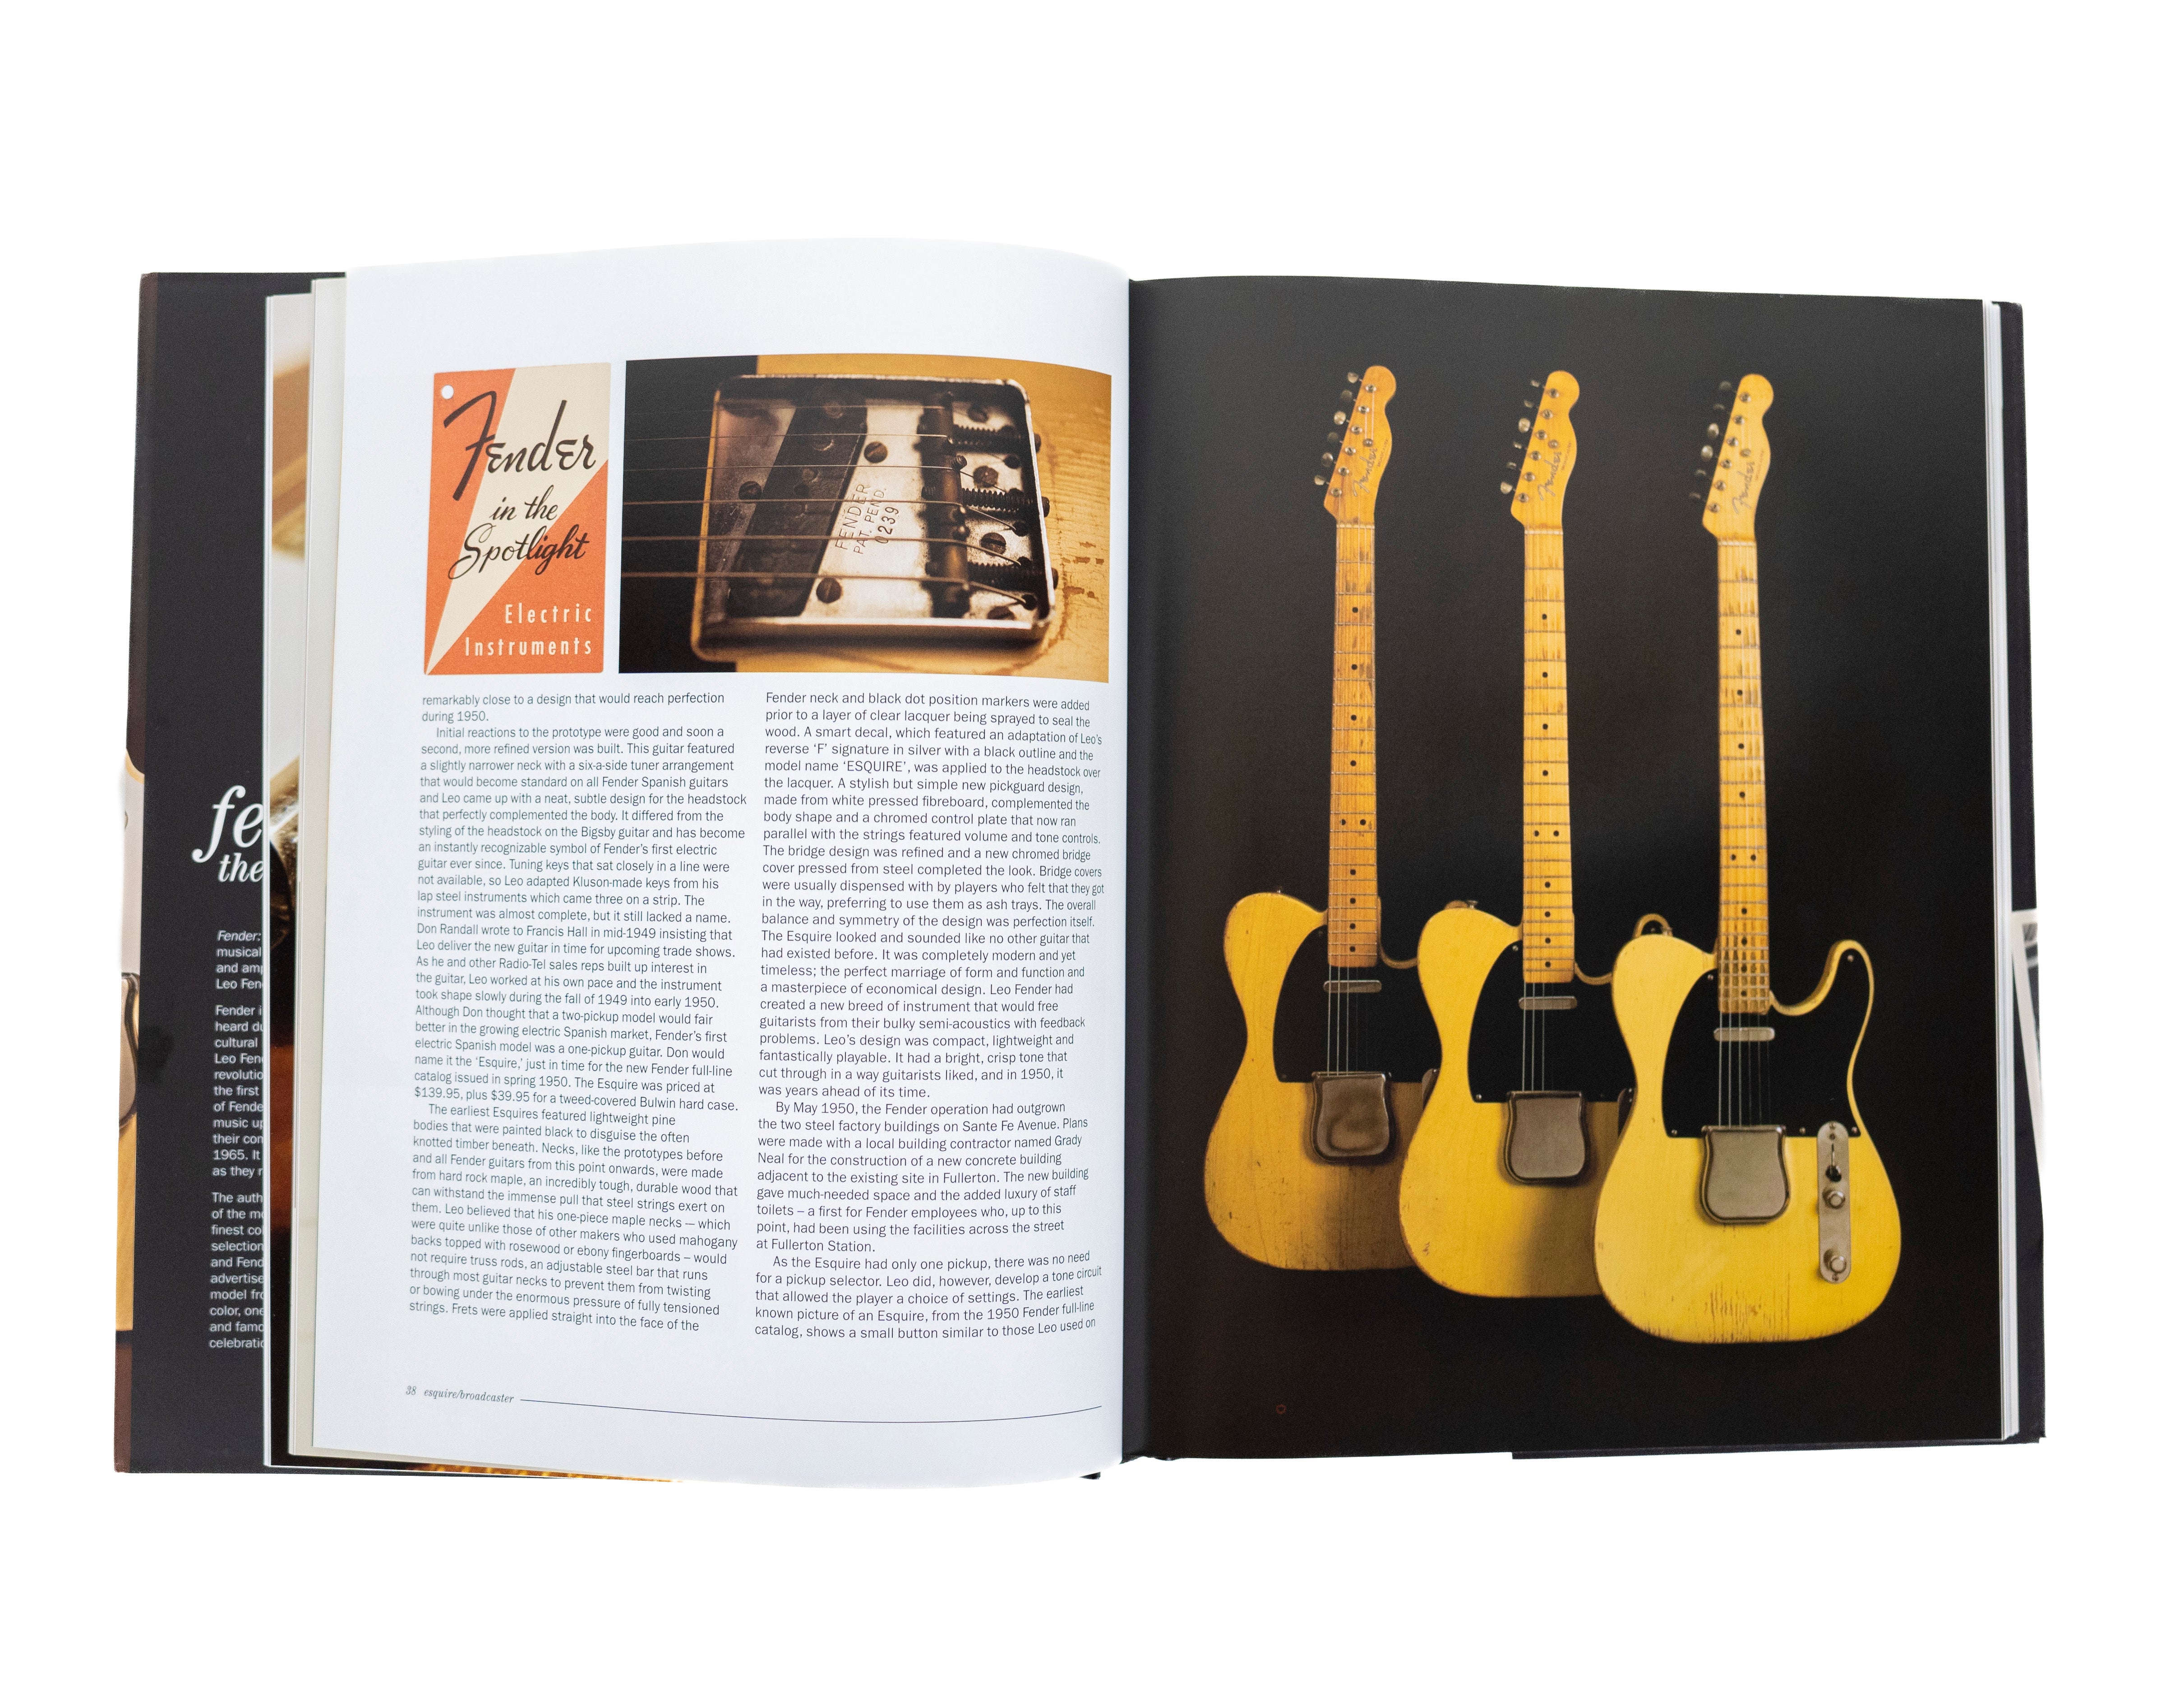 Fender: The Golden Age 1946-1970 - Hardcover Book by Terry Foster